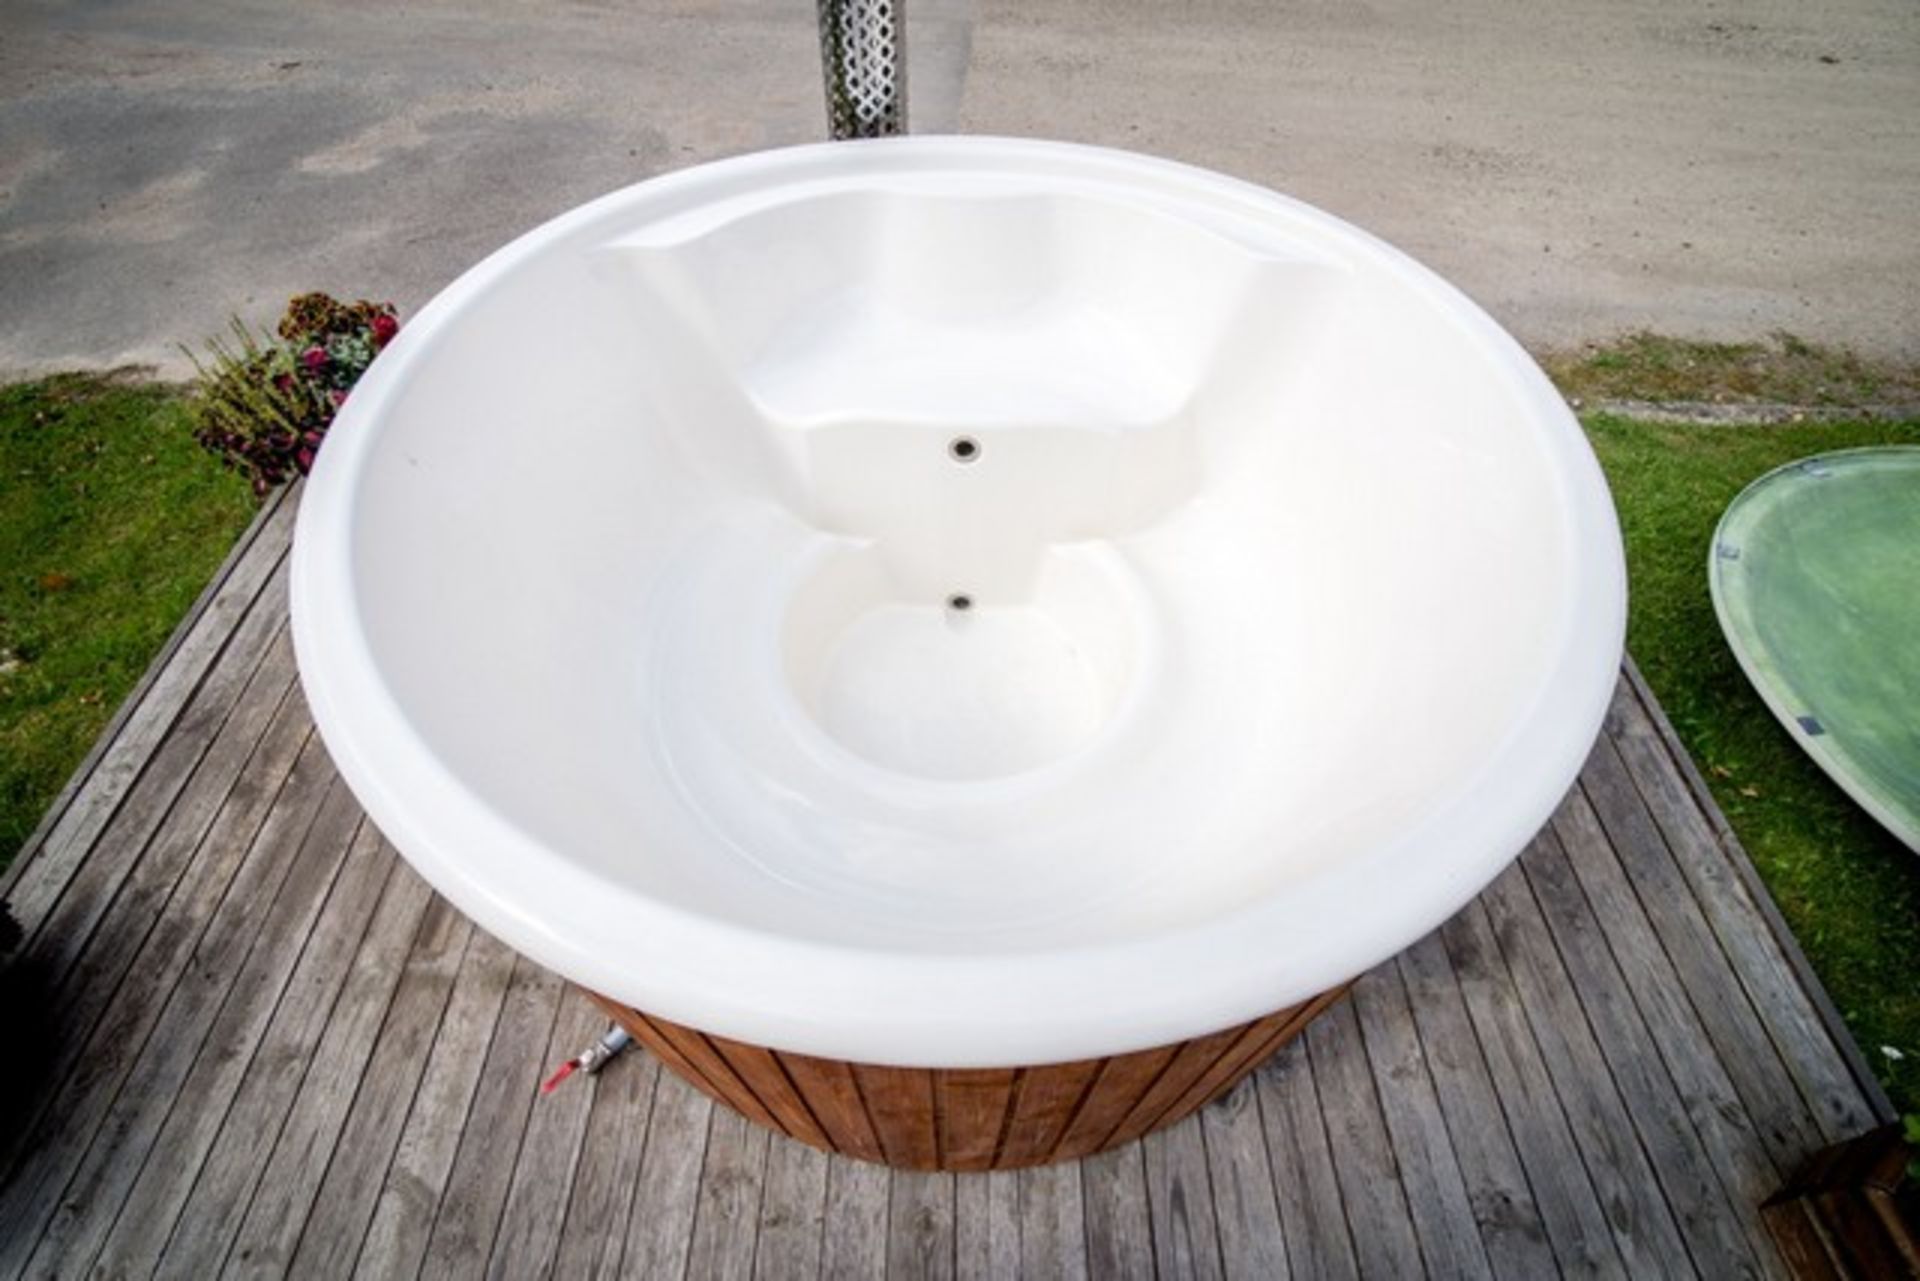 + VAT Brand New 1.8m Fiberglass Hot Tub with Stainless Steel Heater and Chimney - Hot Tub Made from - Image 4 of 4